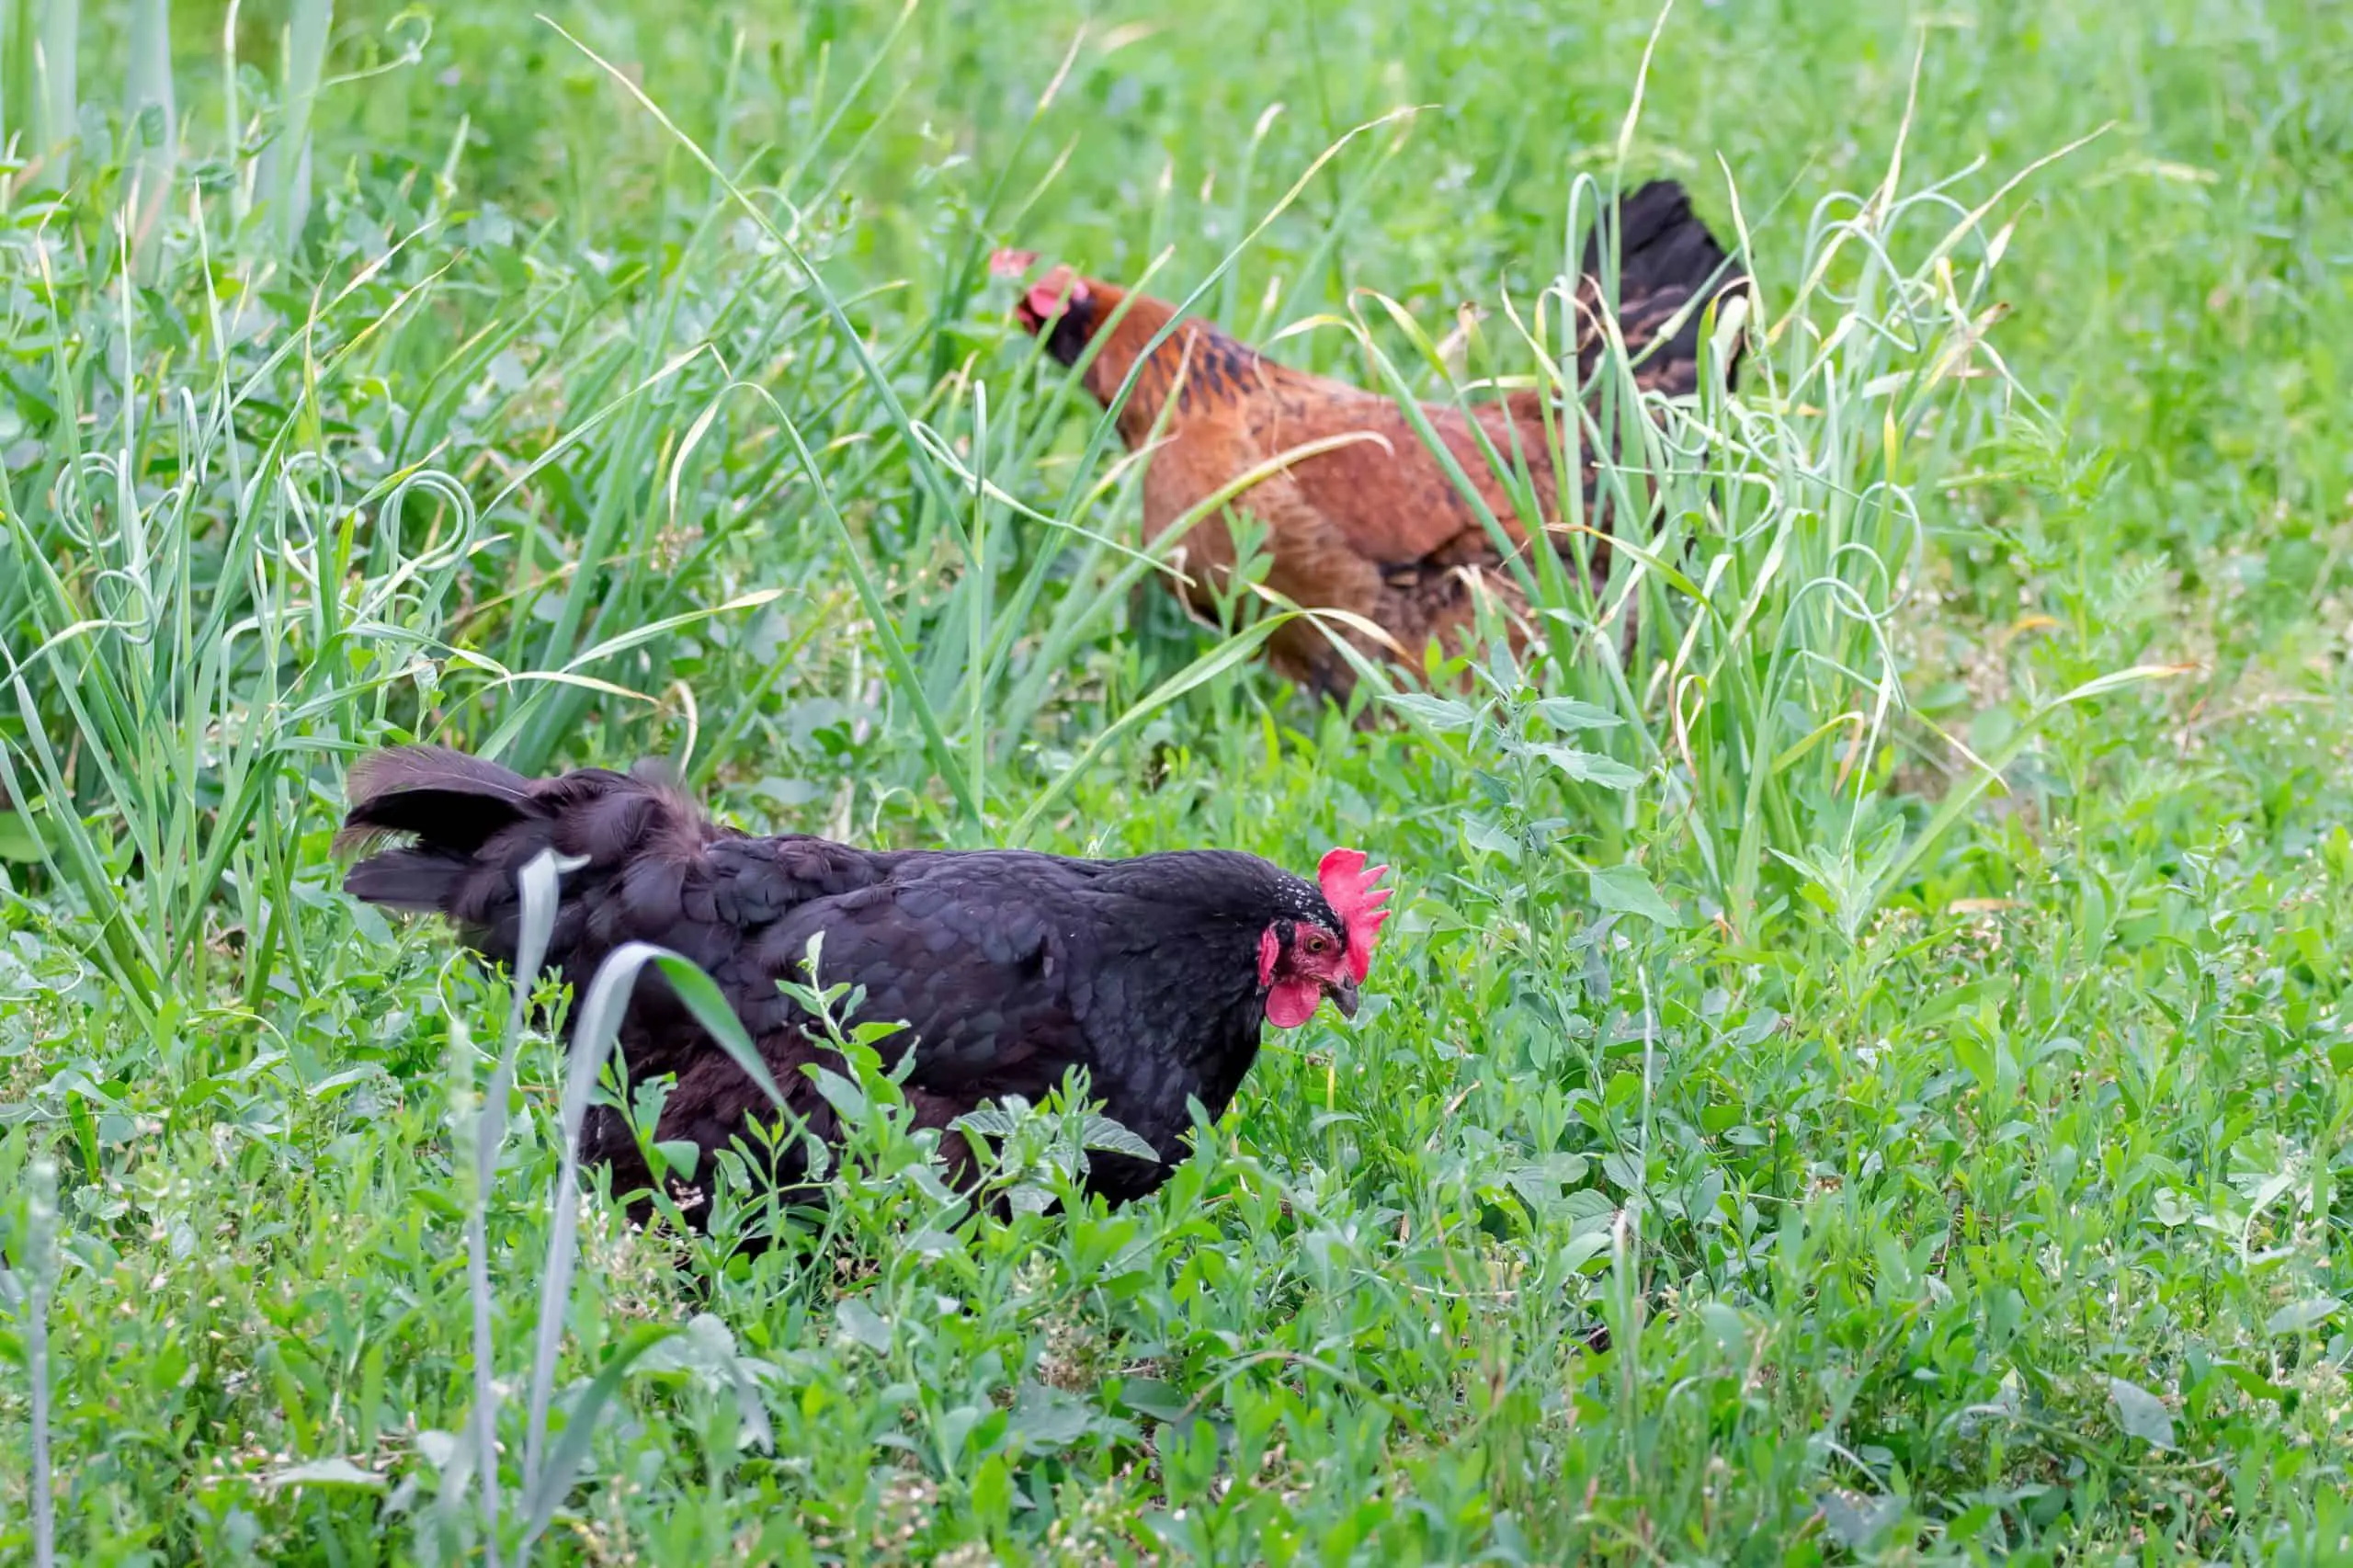 Making sure your garden is pet safe from weed killer spraying for your chickens